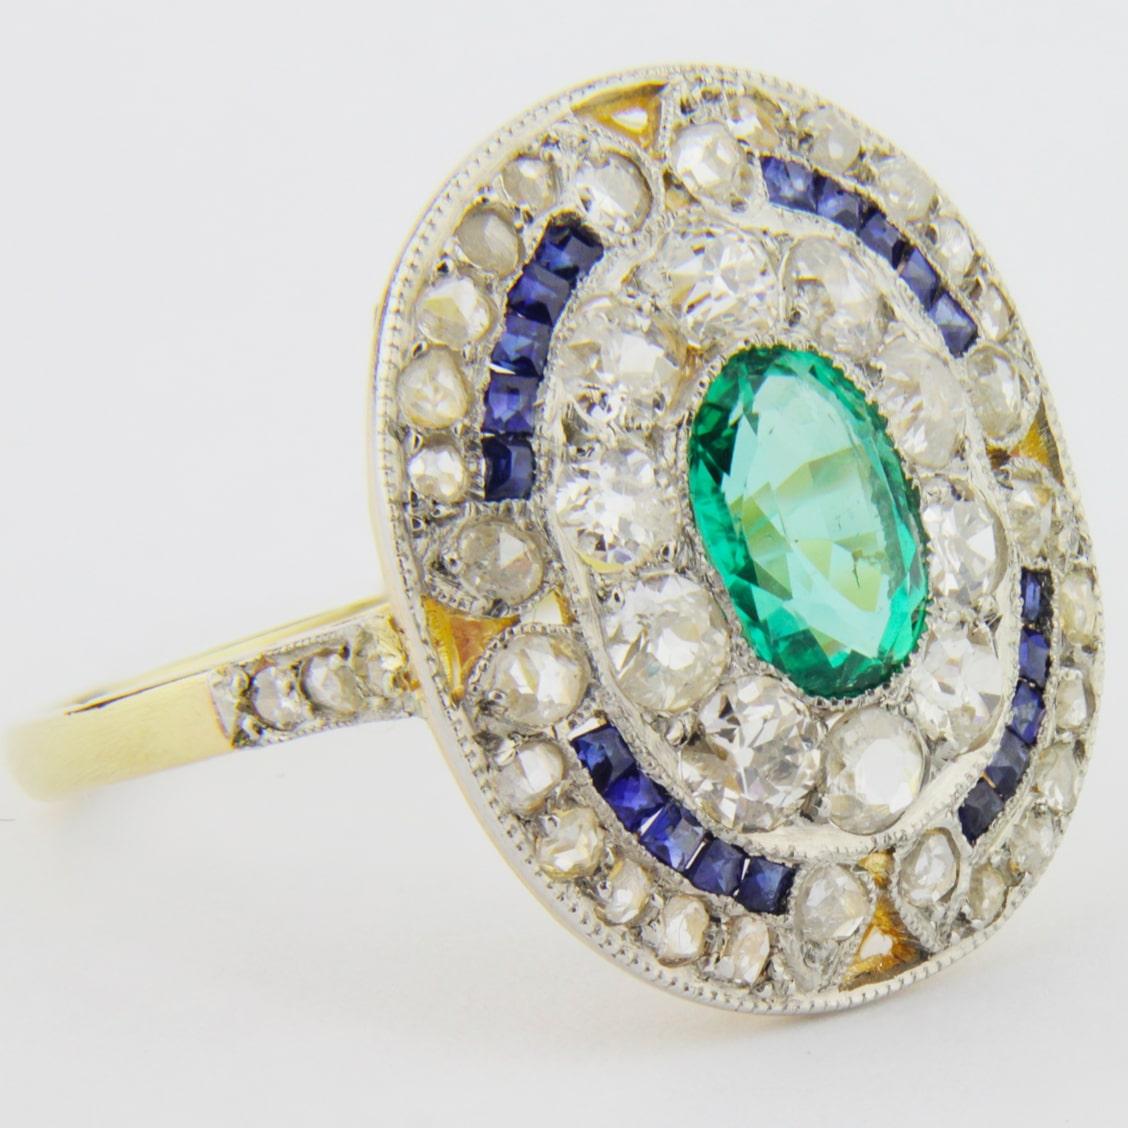 Oval Cut French Art Deco Cocktail Ring with an Emerald, Diamonds and Sapphires